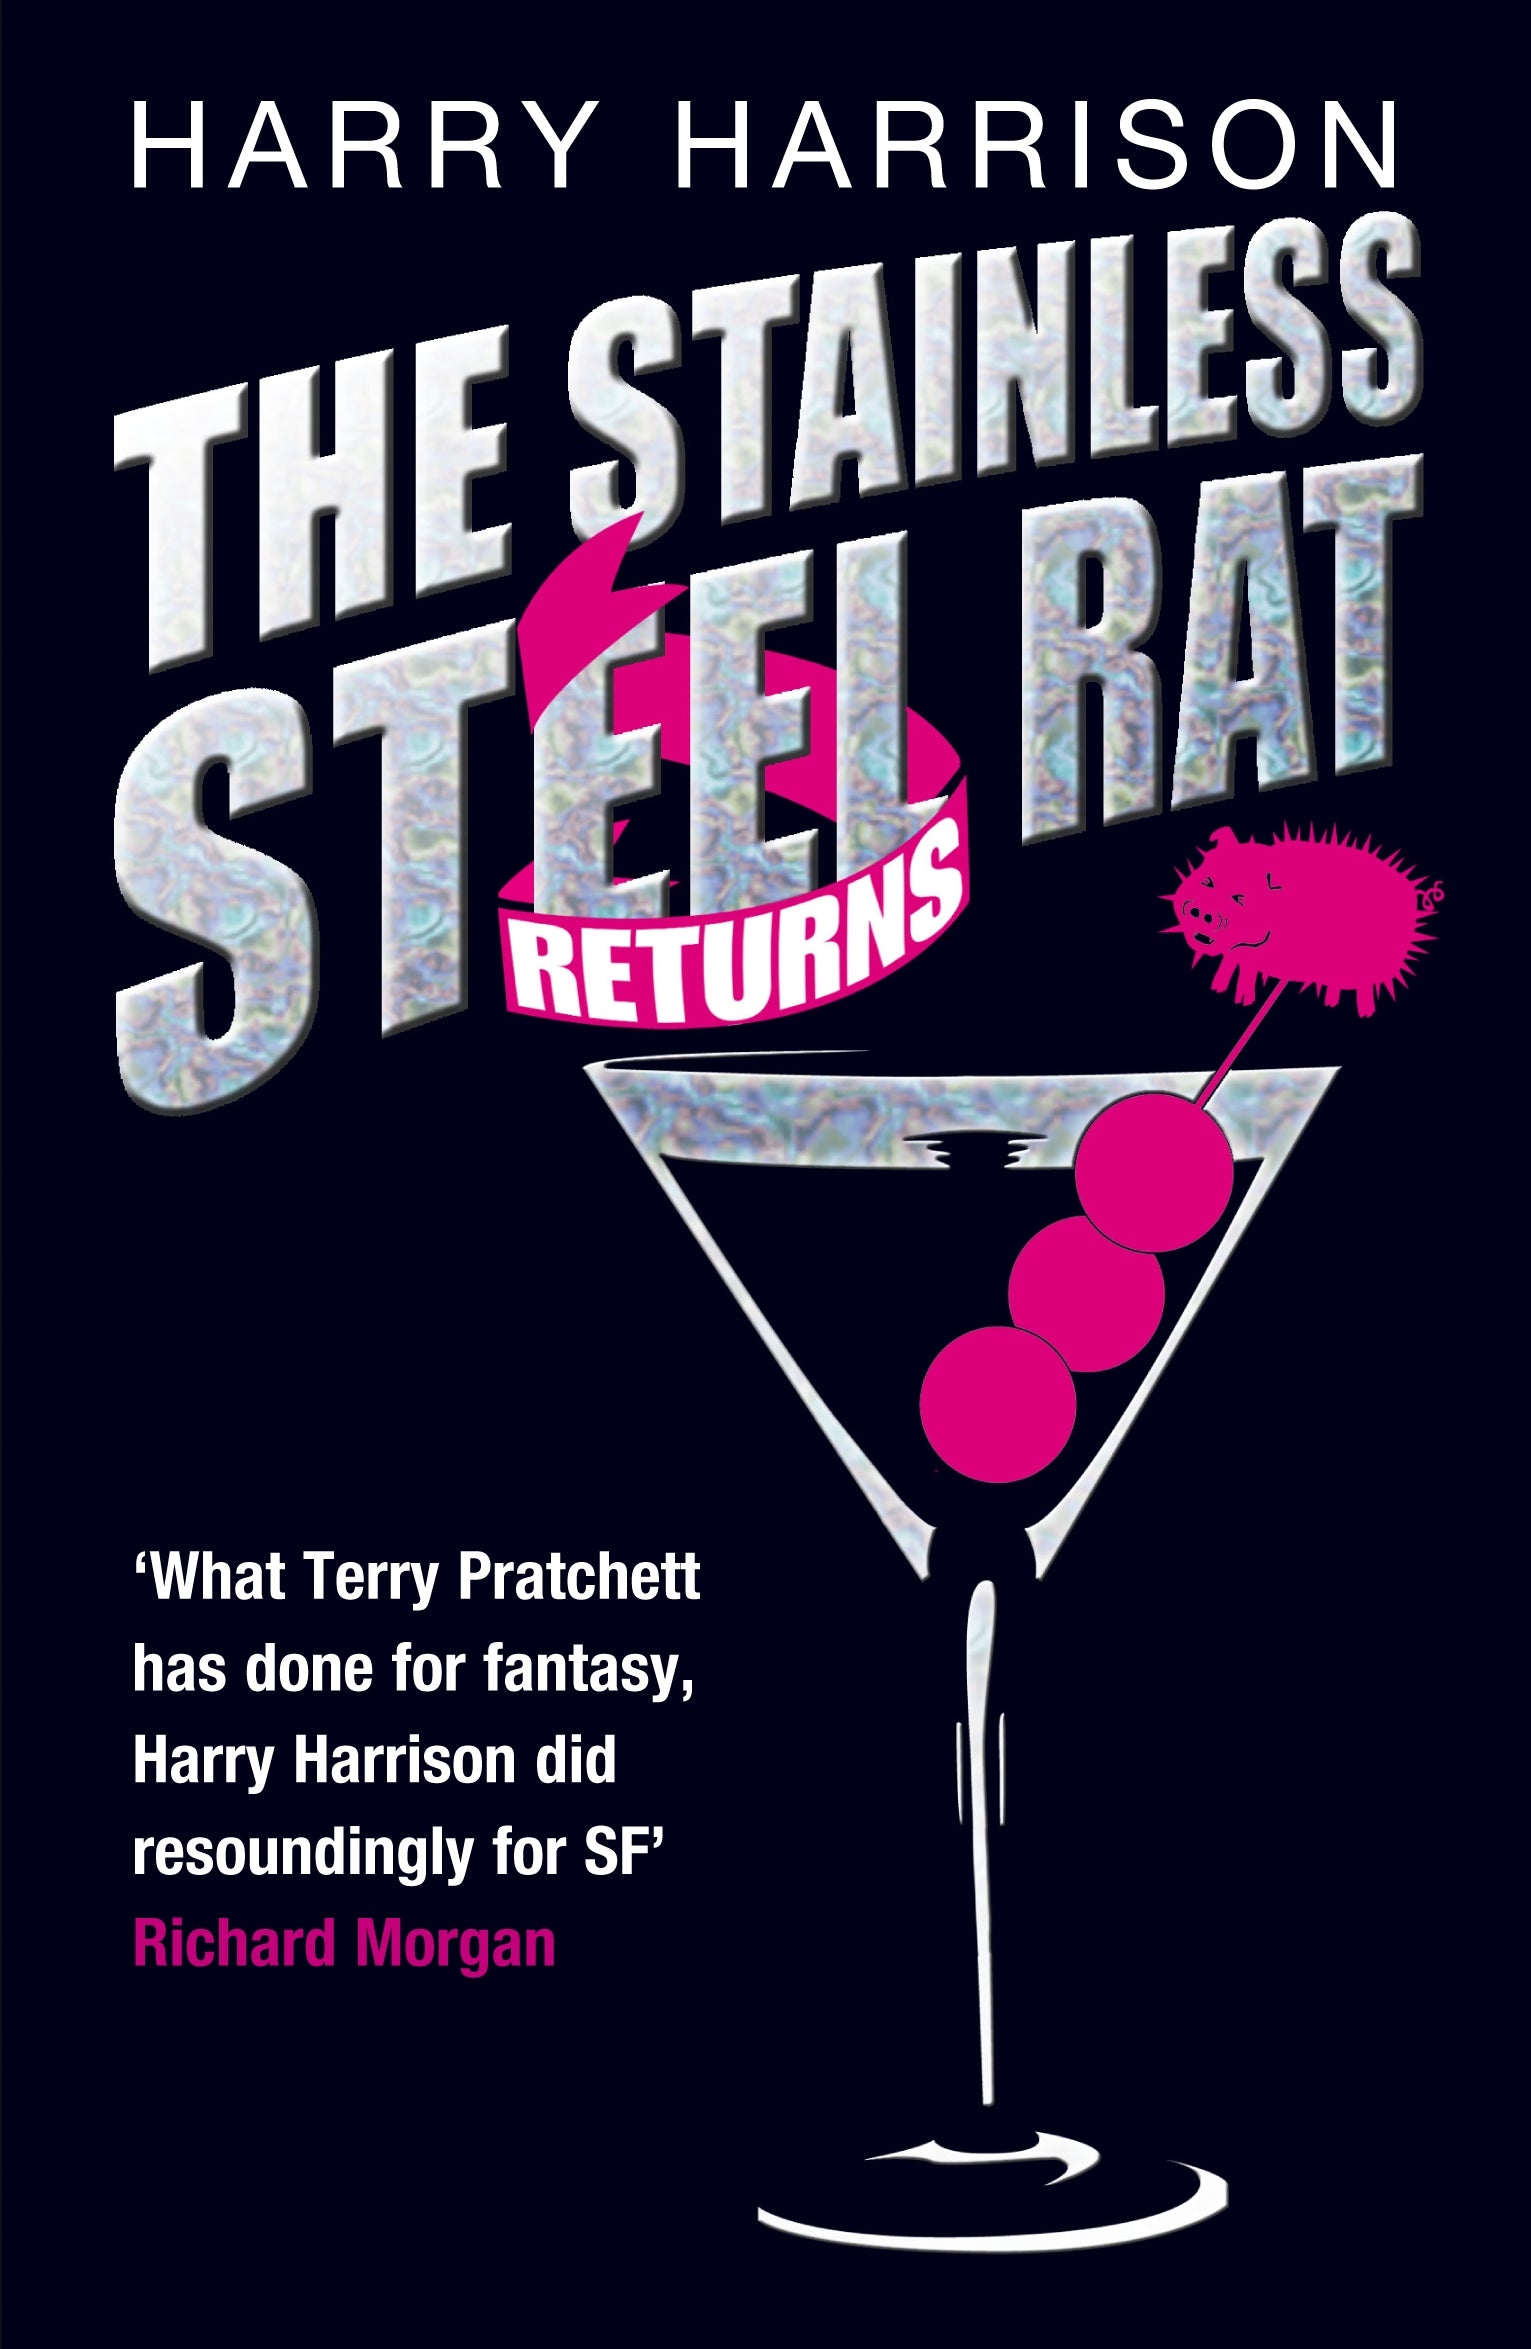 The Stainless Steel Rat Returns by Harry Harrison